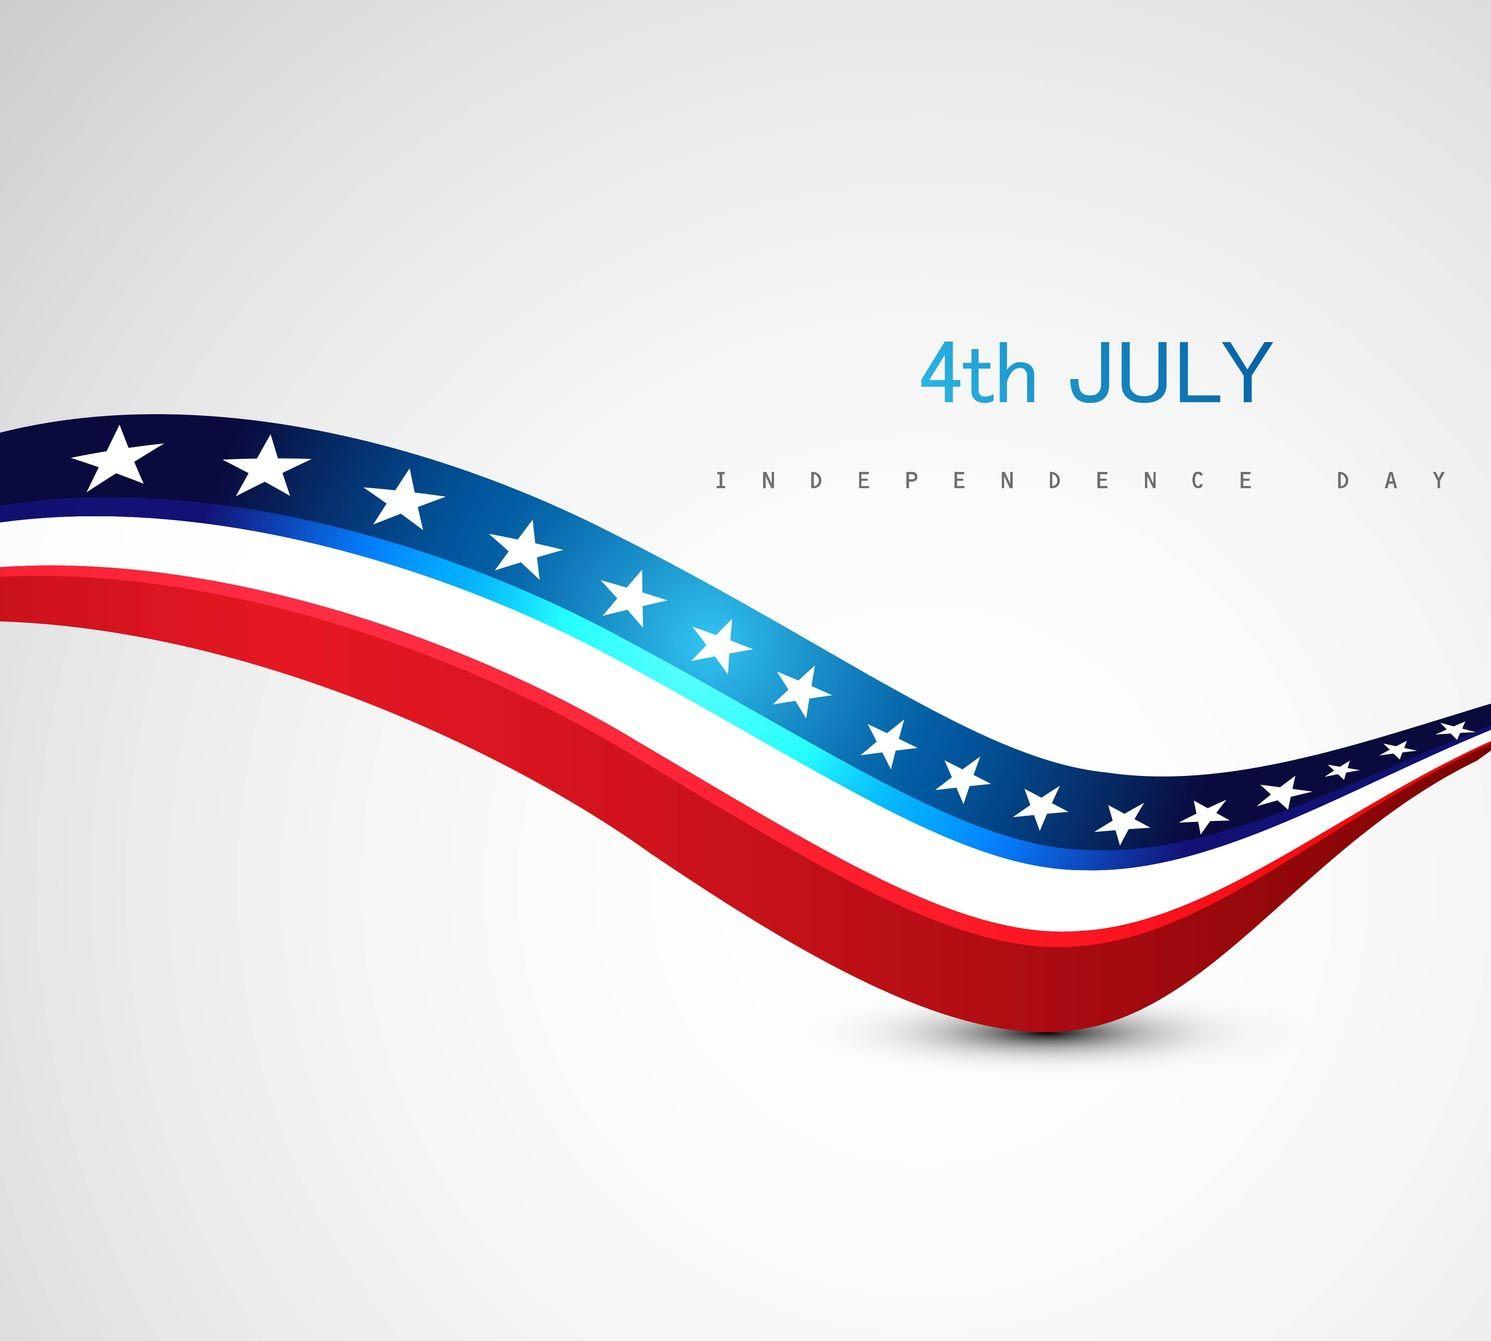 July 4th Independence Day Wallpaper